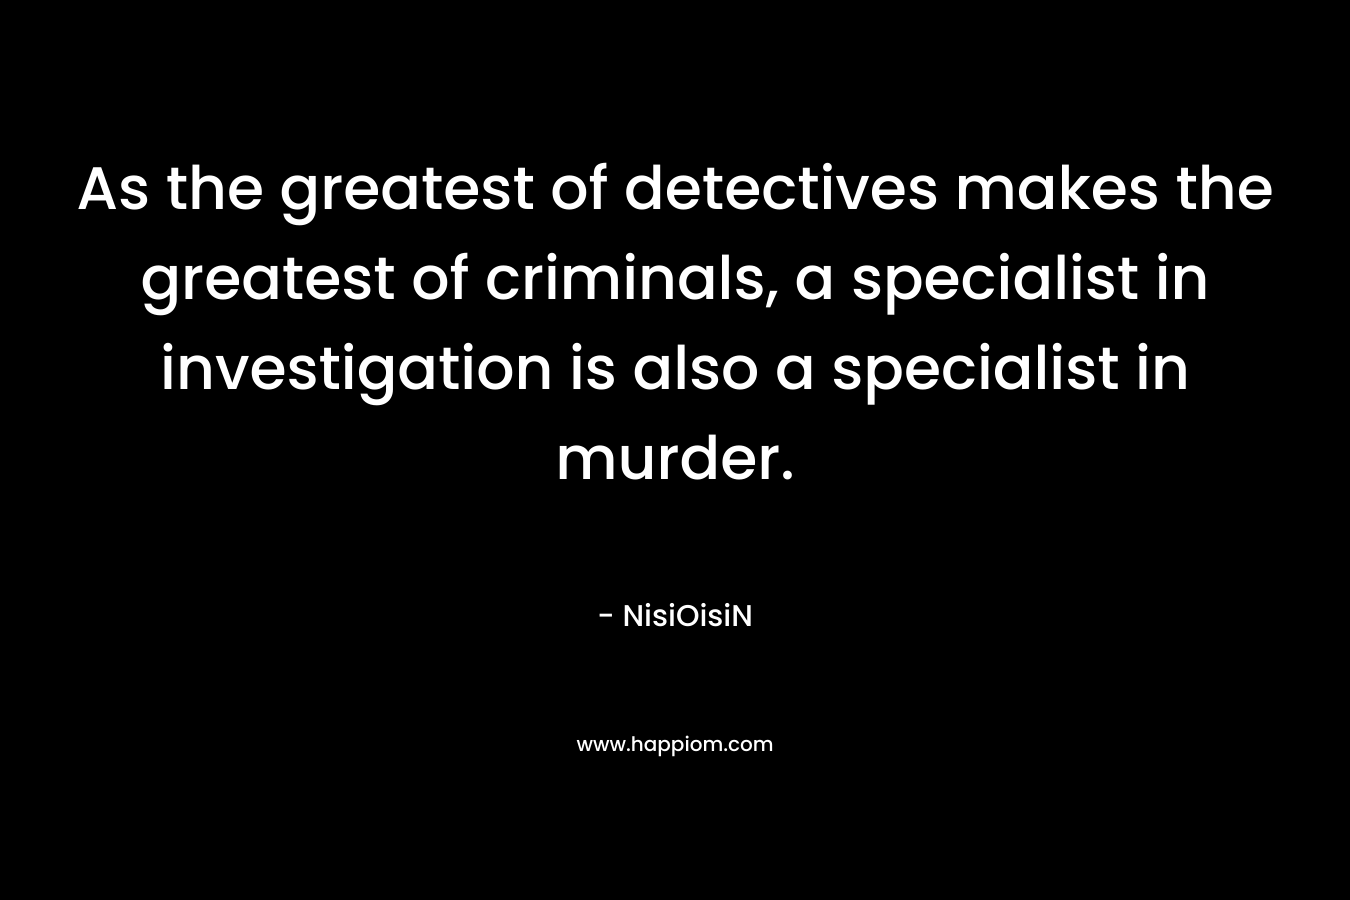 As the greatest of detectives makes the greatest of criminals, a specialist in investigation is also a specialist in murder. – NisiOisiN